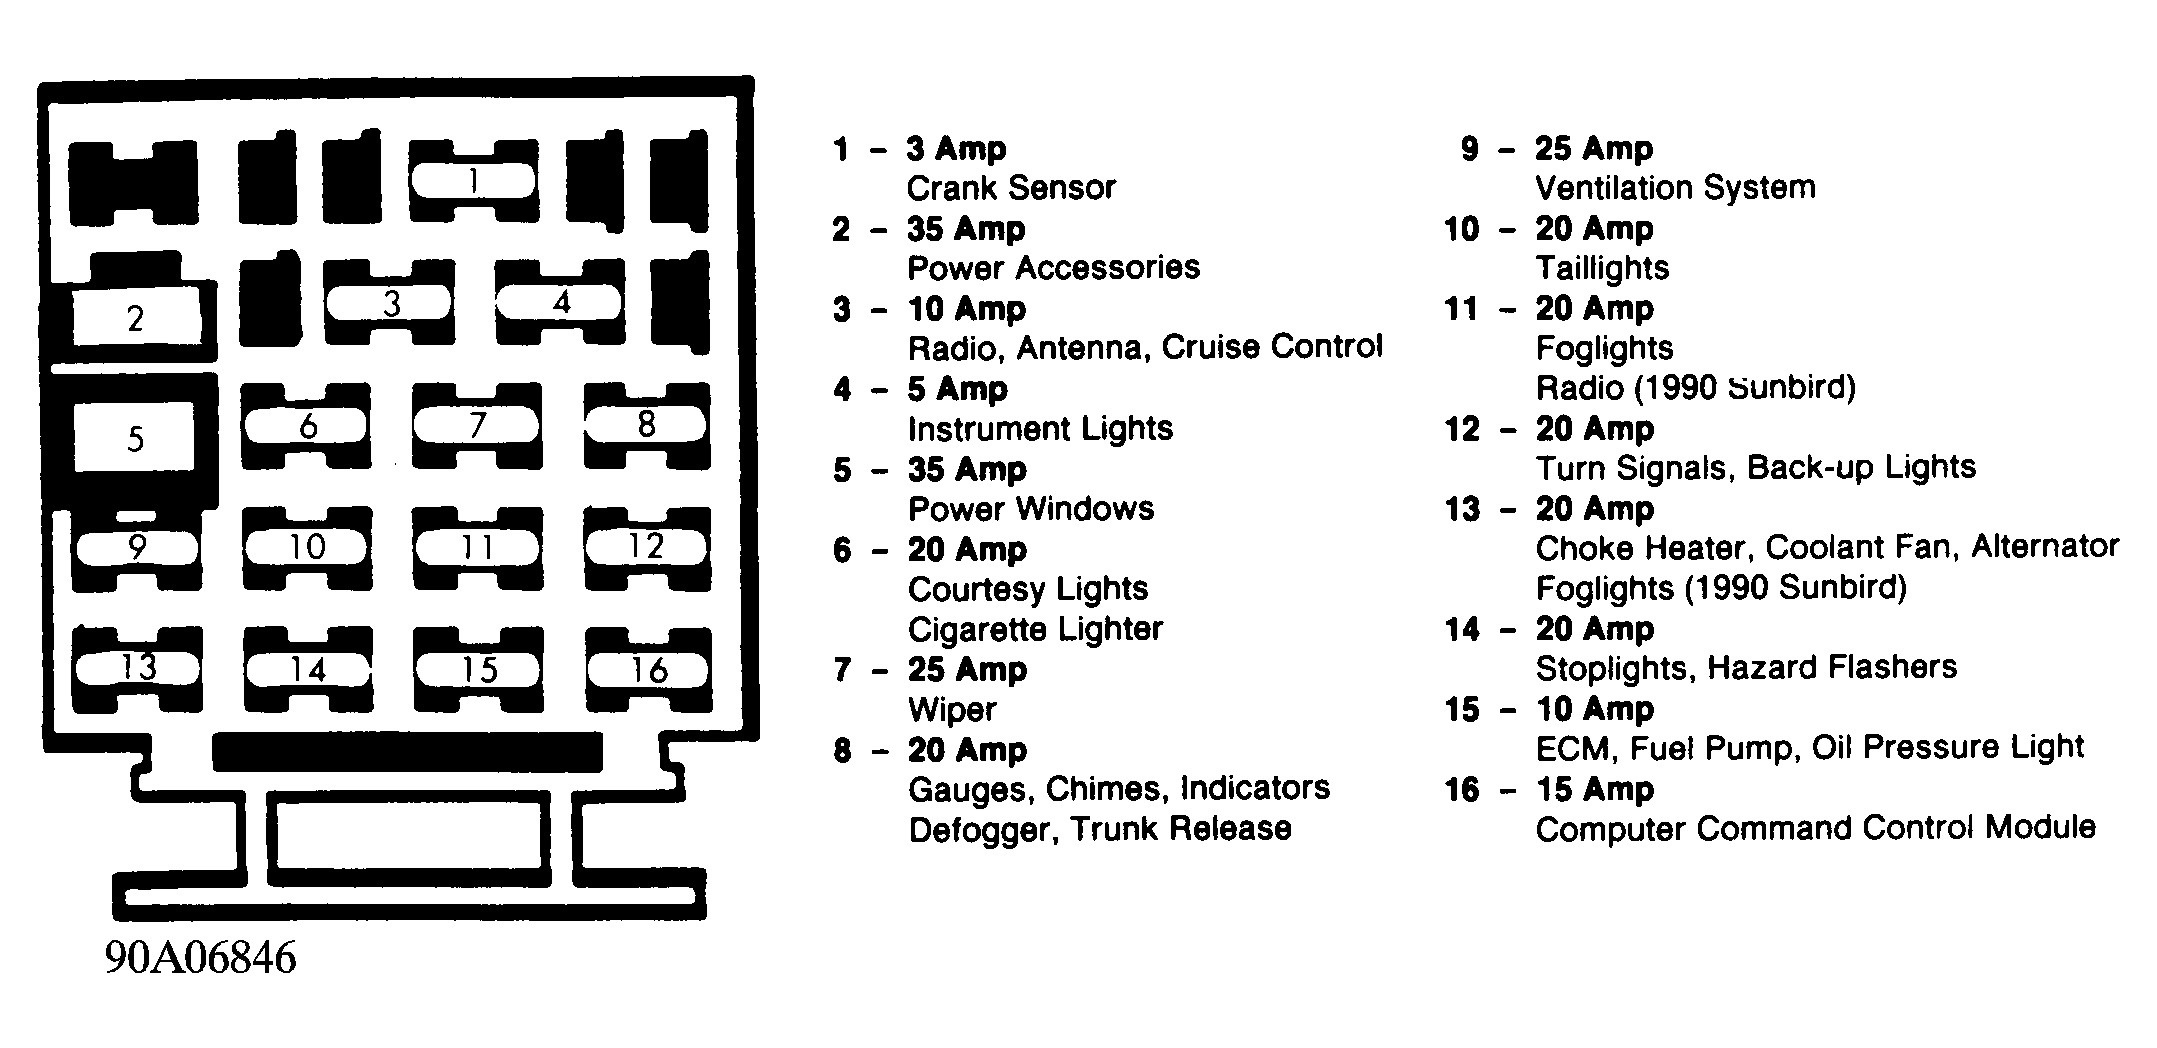 Chevrolet Cavalier Z24 1990 - Component Locations -  Fuse Panel Identification (Typical 1983-90 Models)